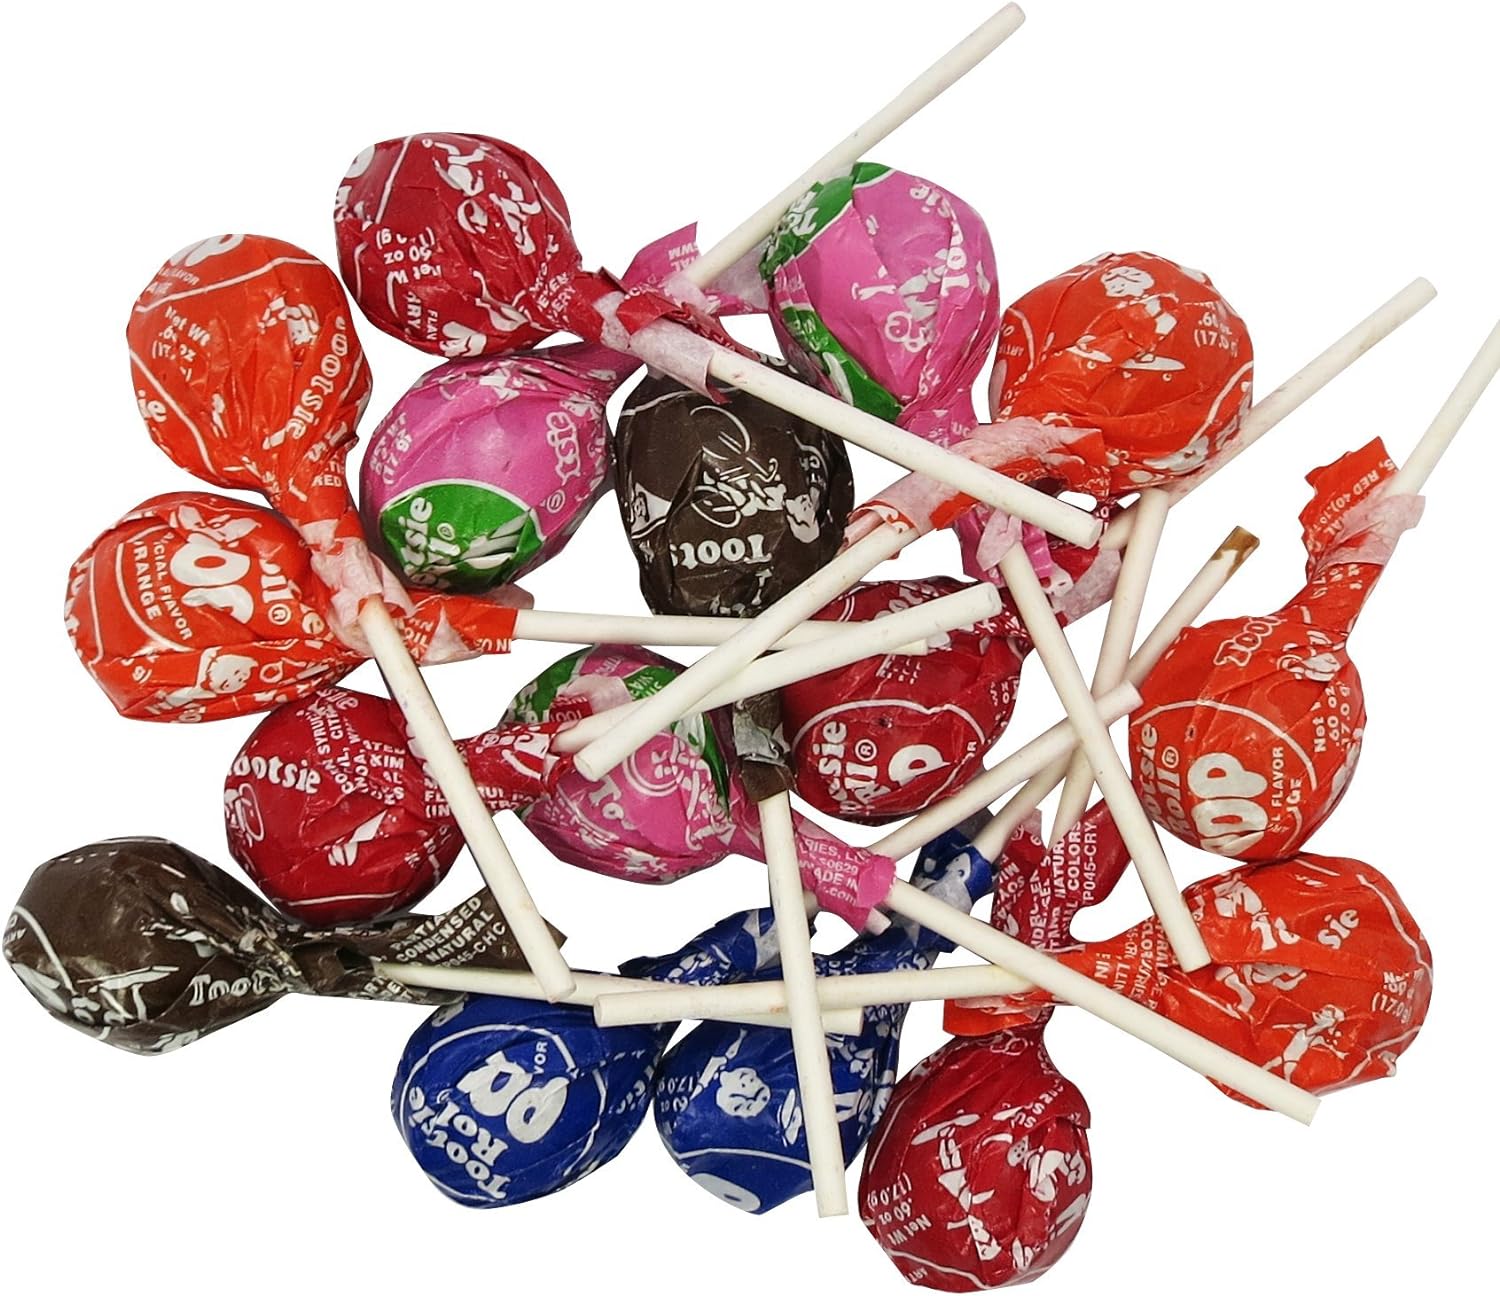  A Great Surprise Tootsie Pops - 4 Pounds - Large Tootsie Roll Pops - Assorted Flavored Lollipops, Bulk Candy, Party Bag Family Size